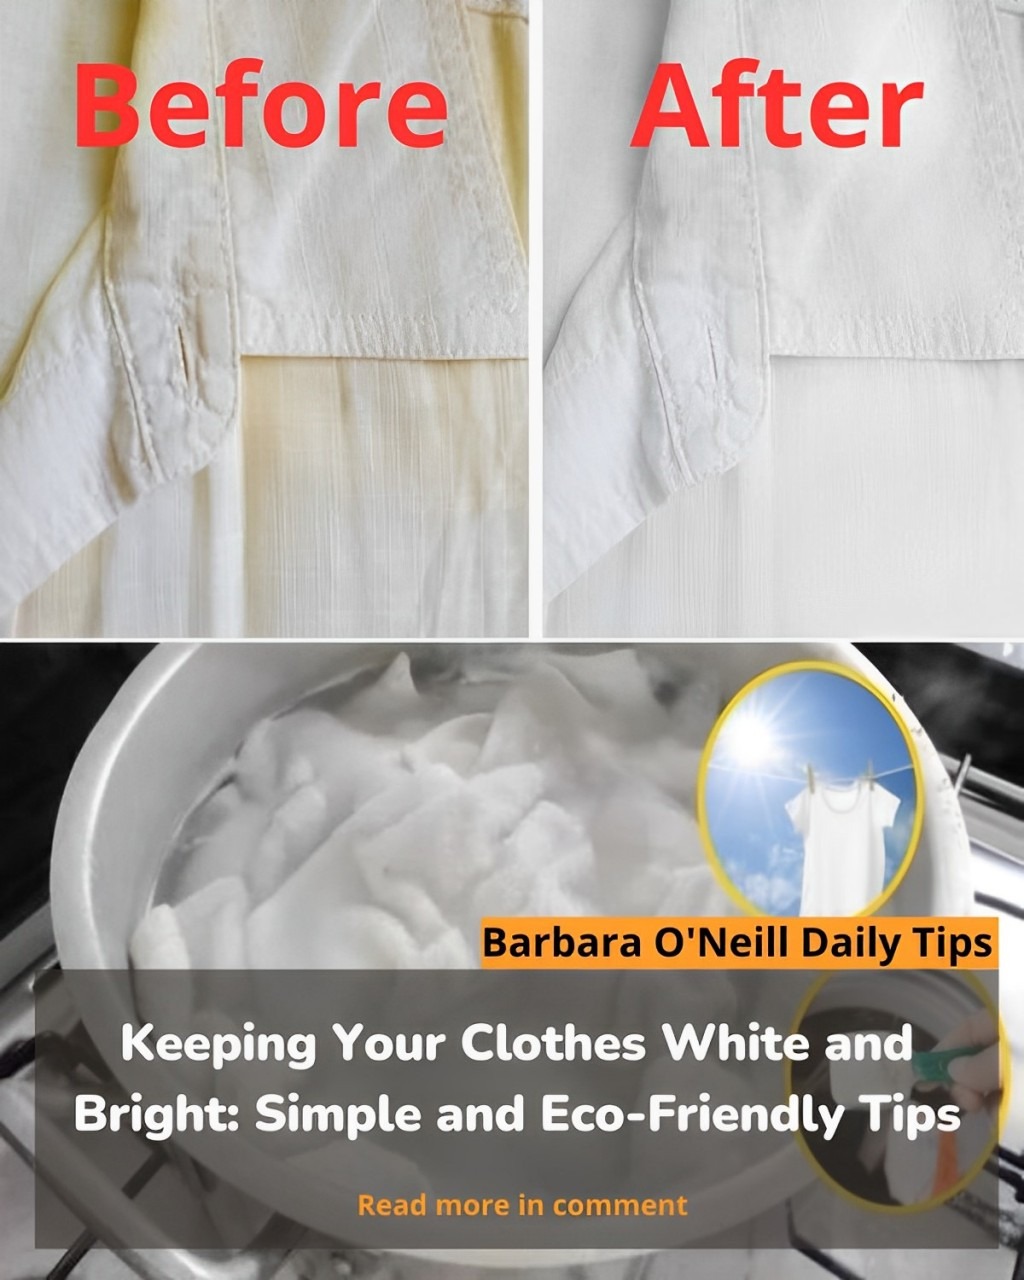 Keeping Your Clothes White and Bright: Tips That Are Both Easy and Friendly to the Environment